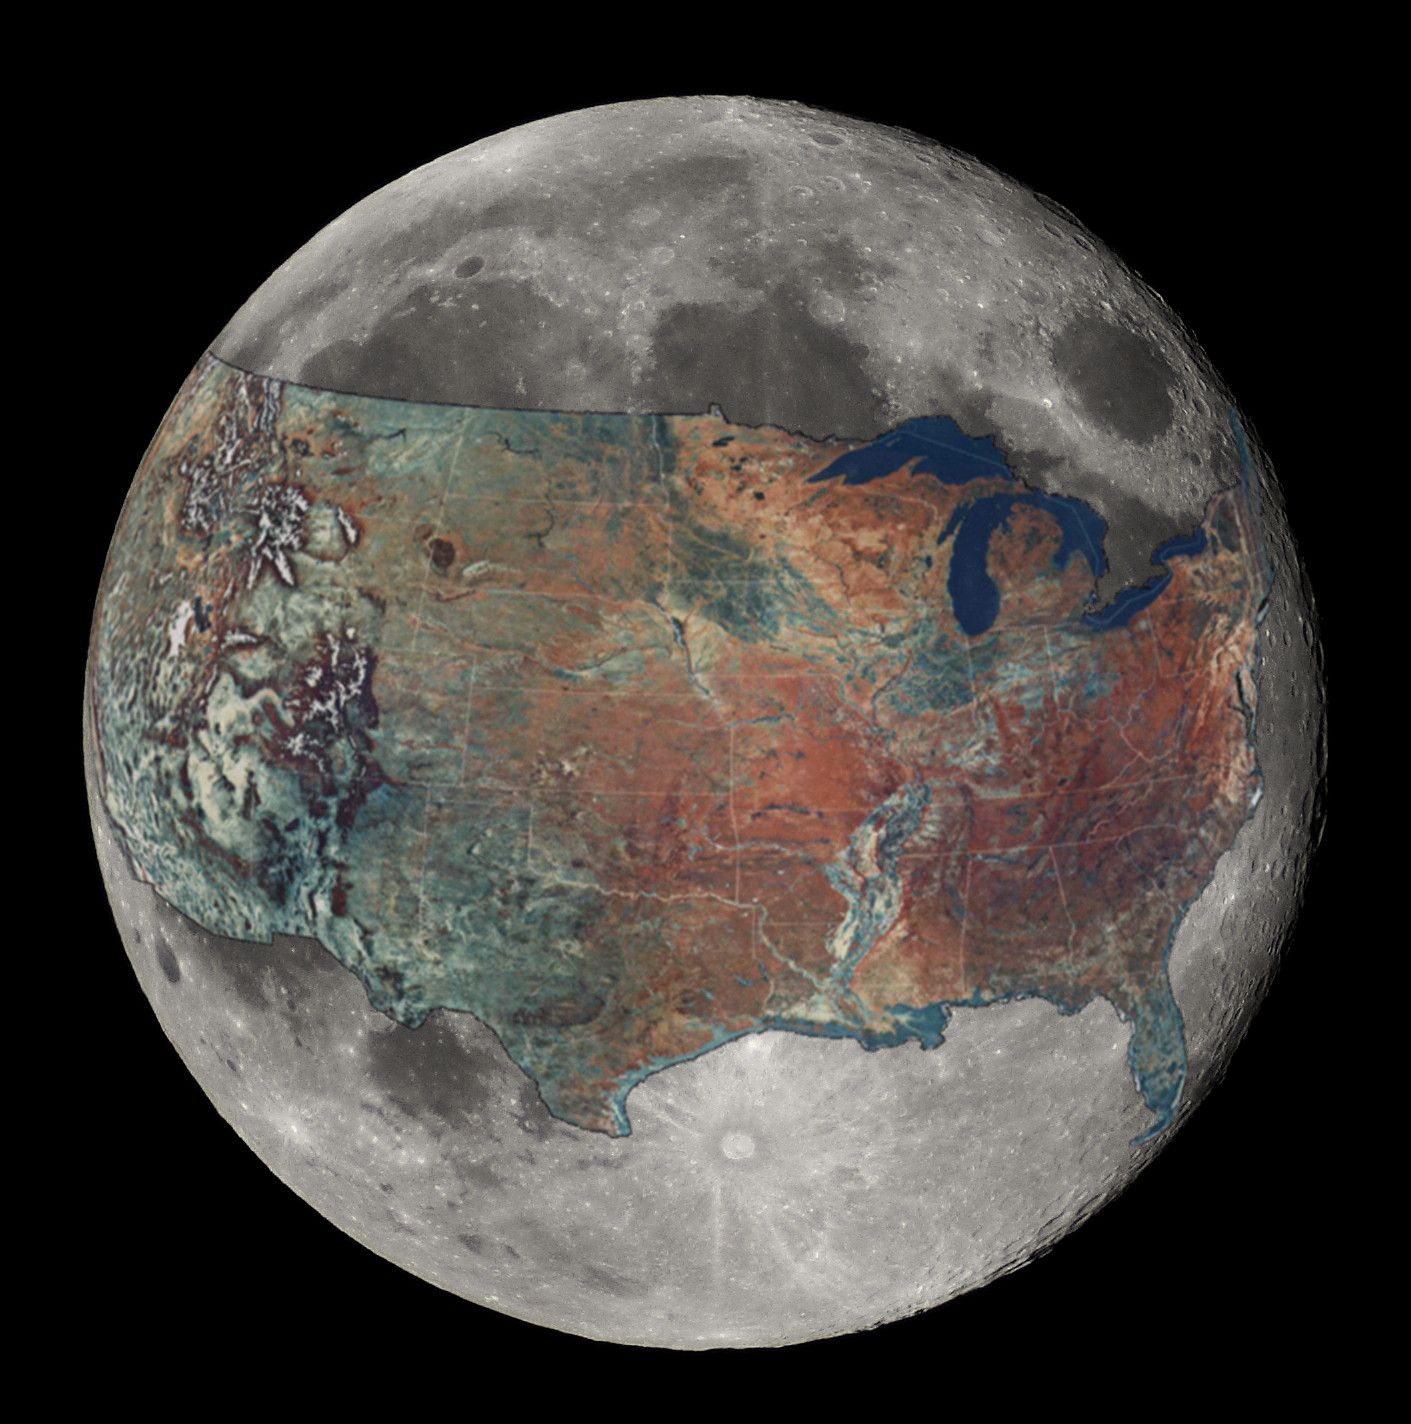 And now for a sense of scale: a map of the U.S. overlaid on the Moon